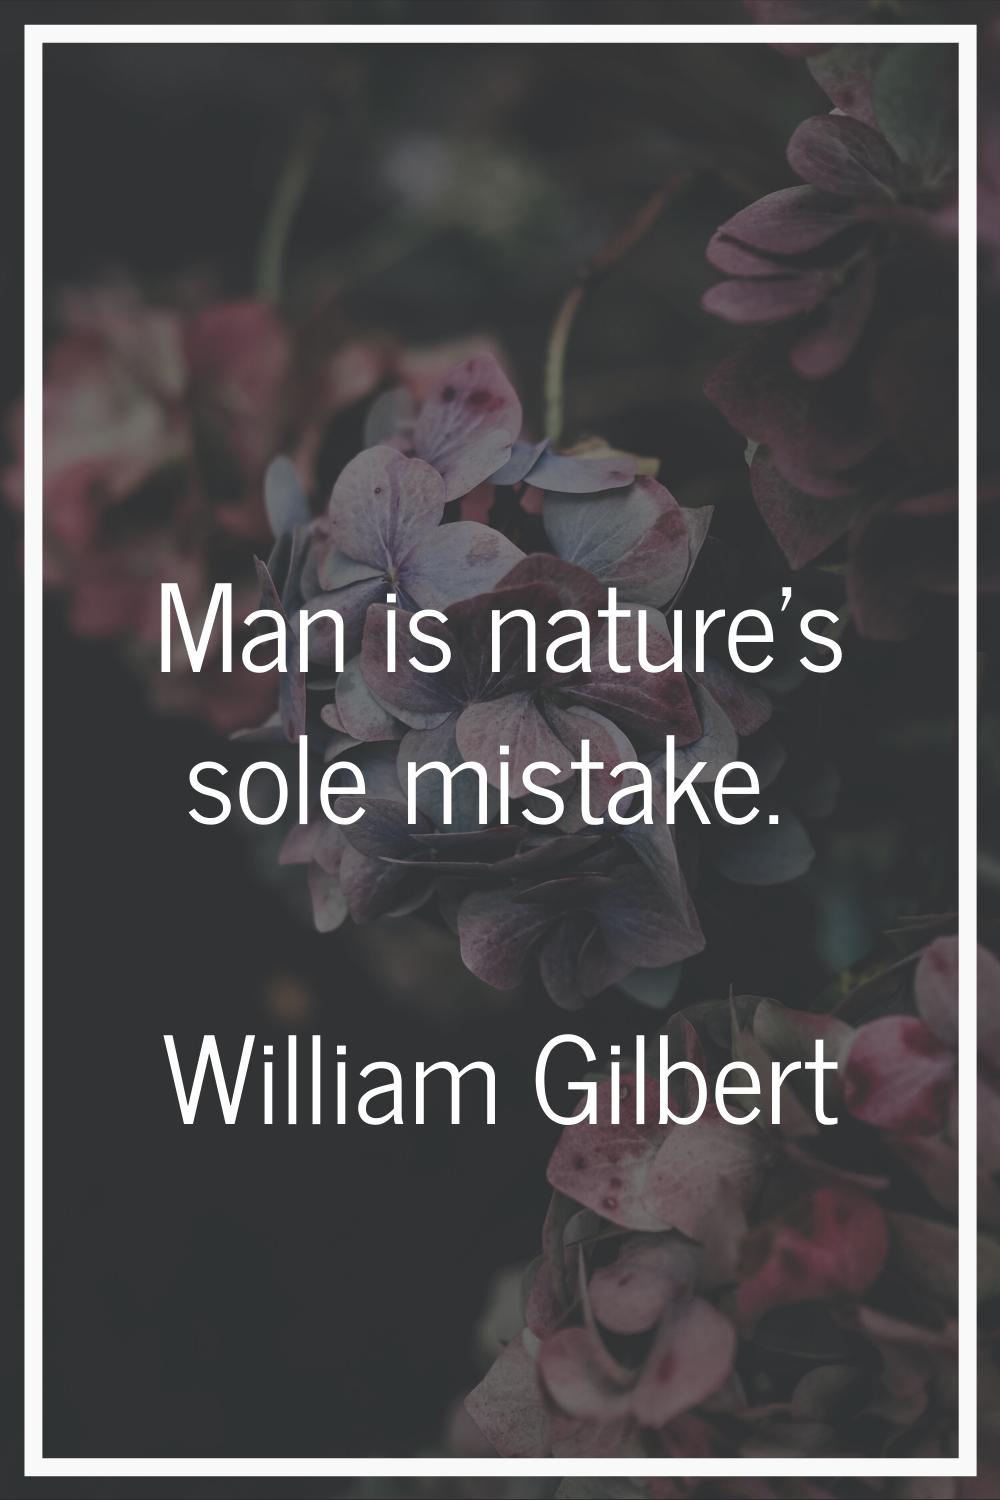 Man is nature's sole mistake.